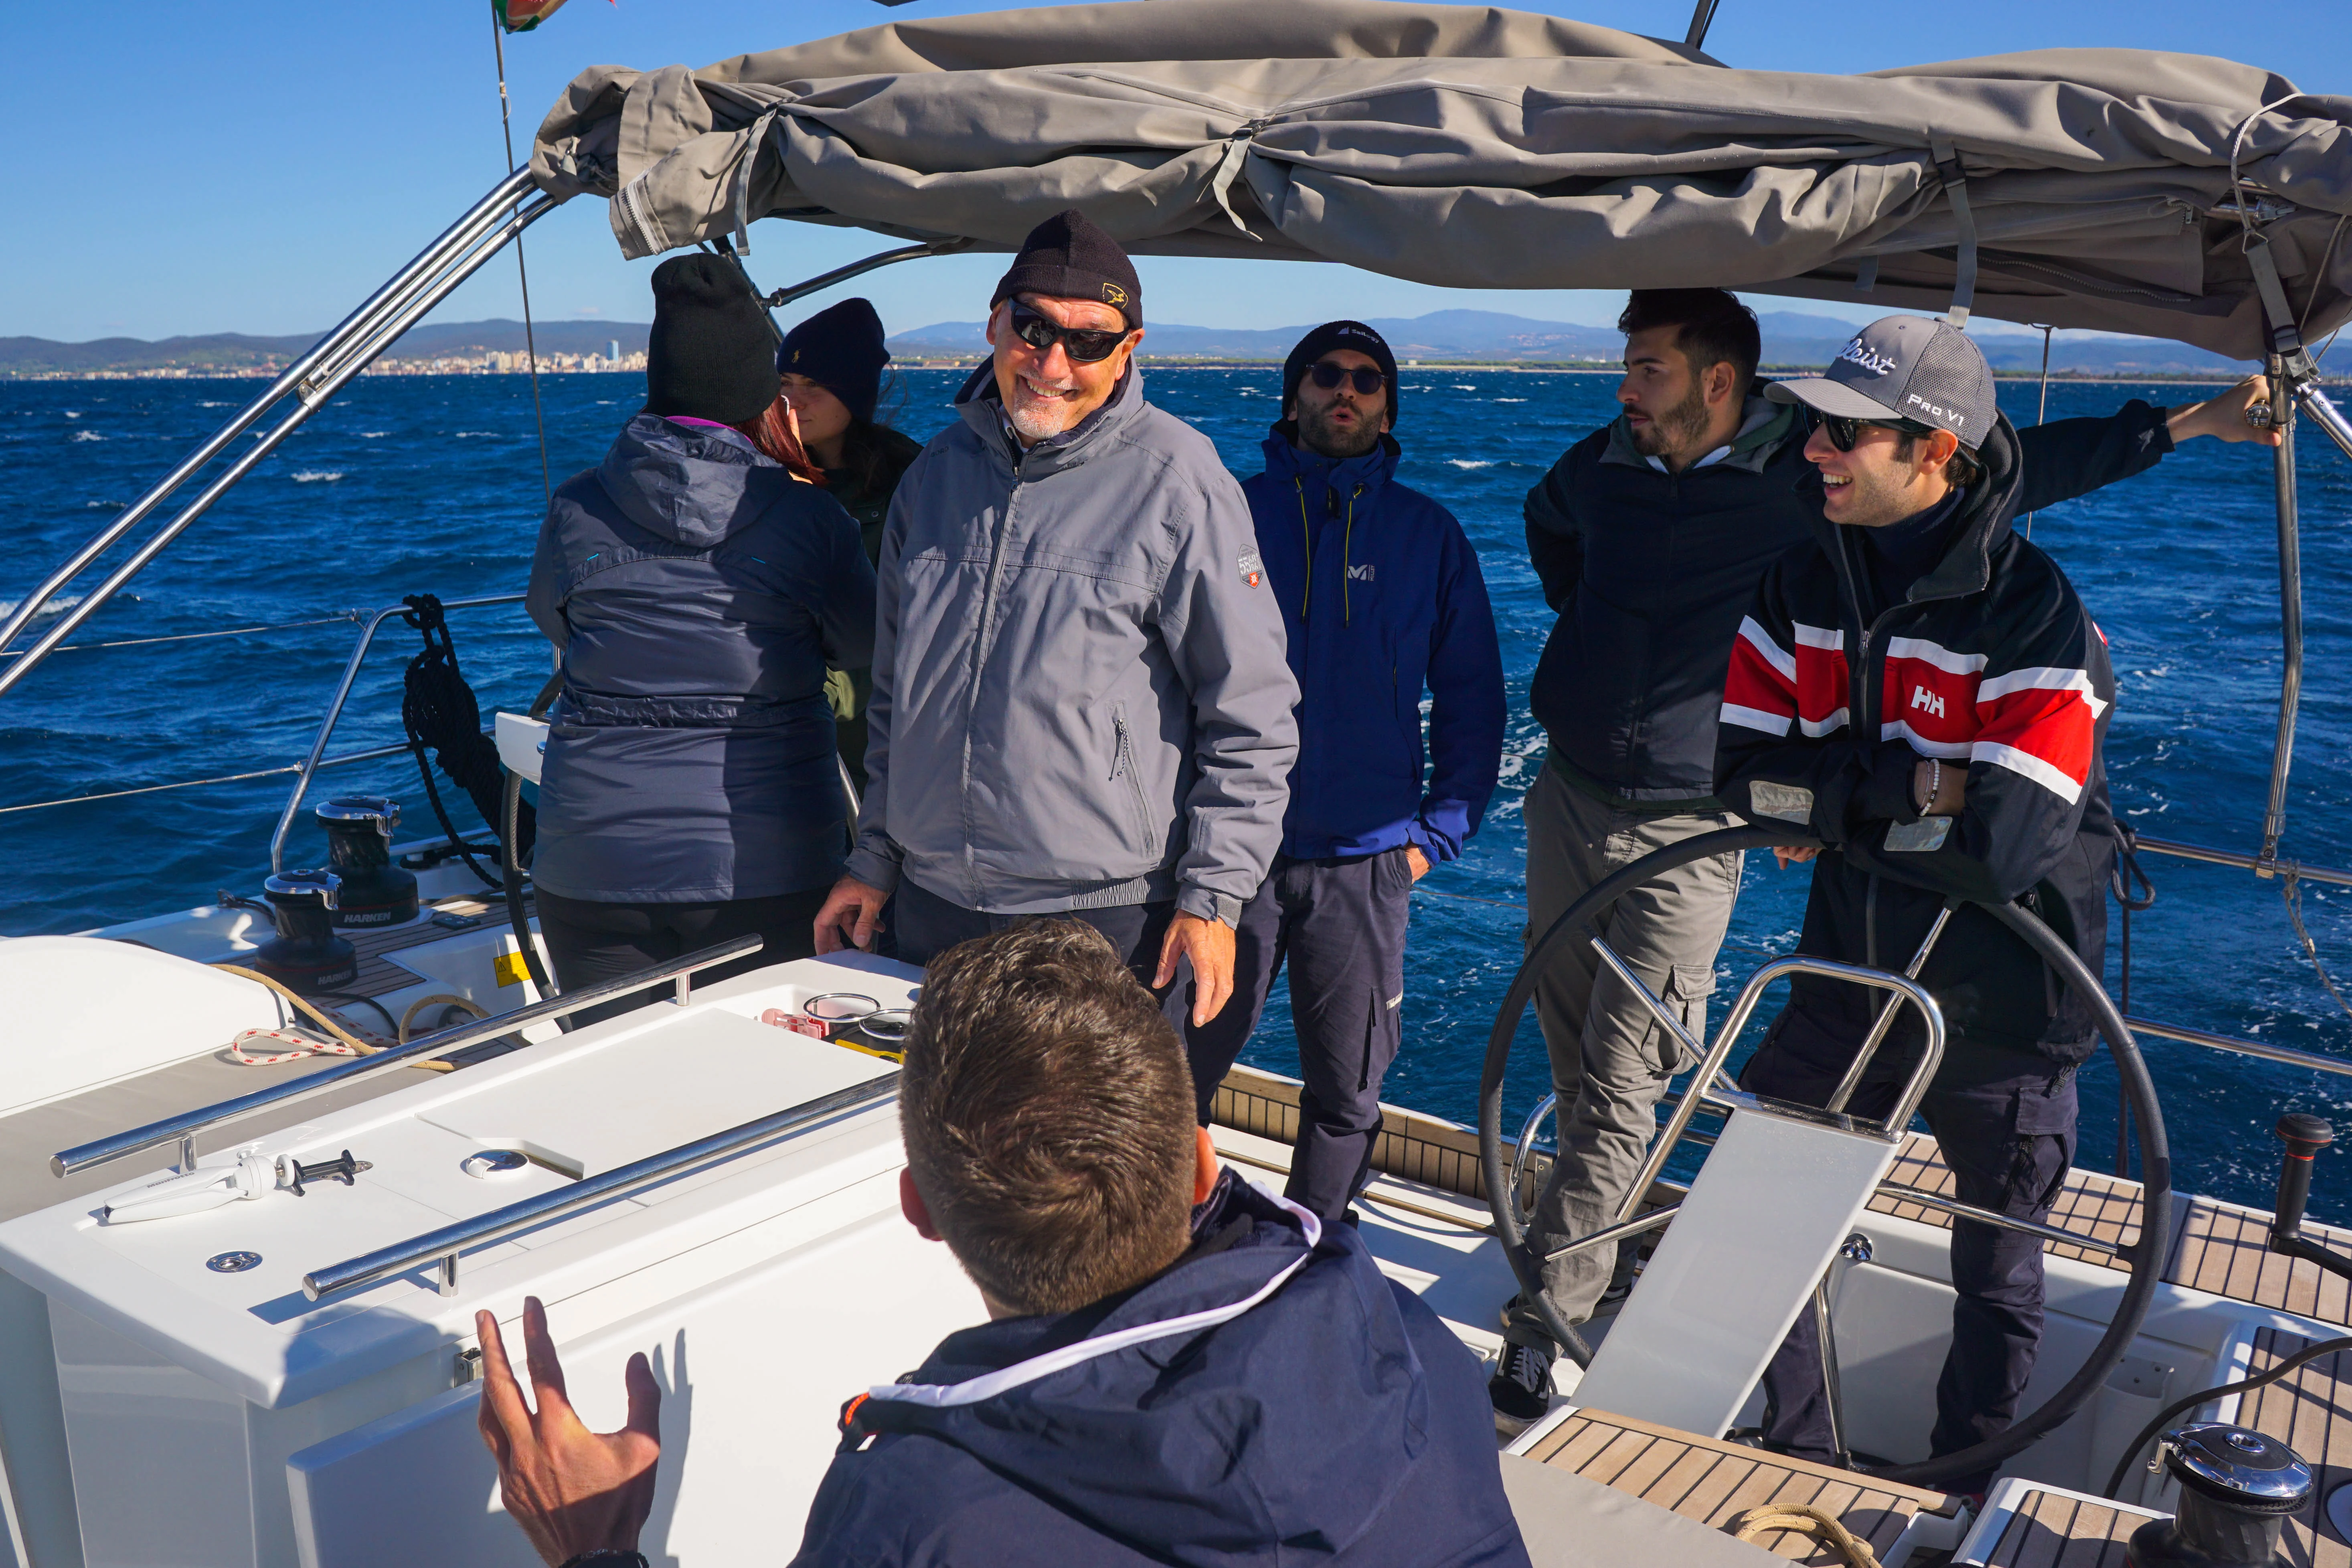 Our crew onboard the brand new Beneteau